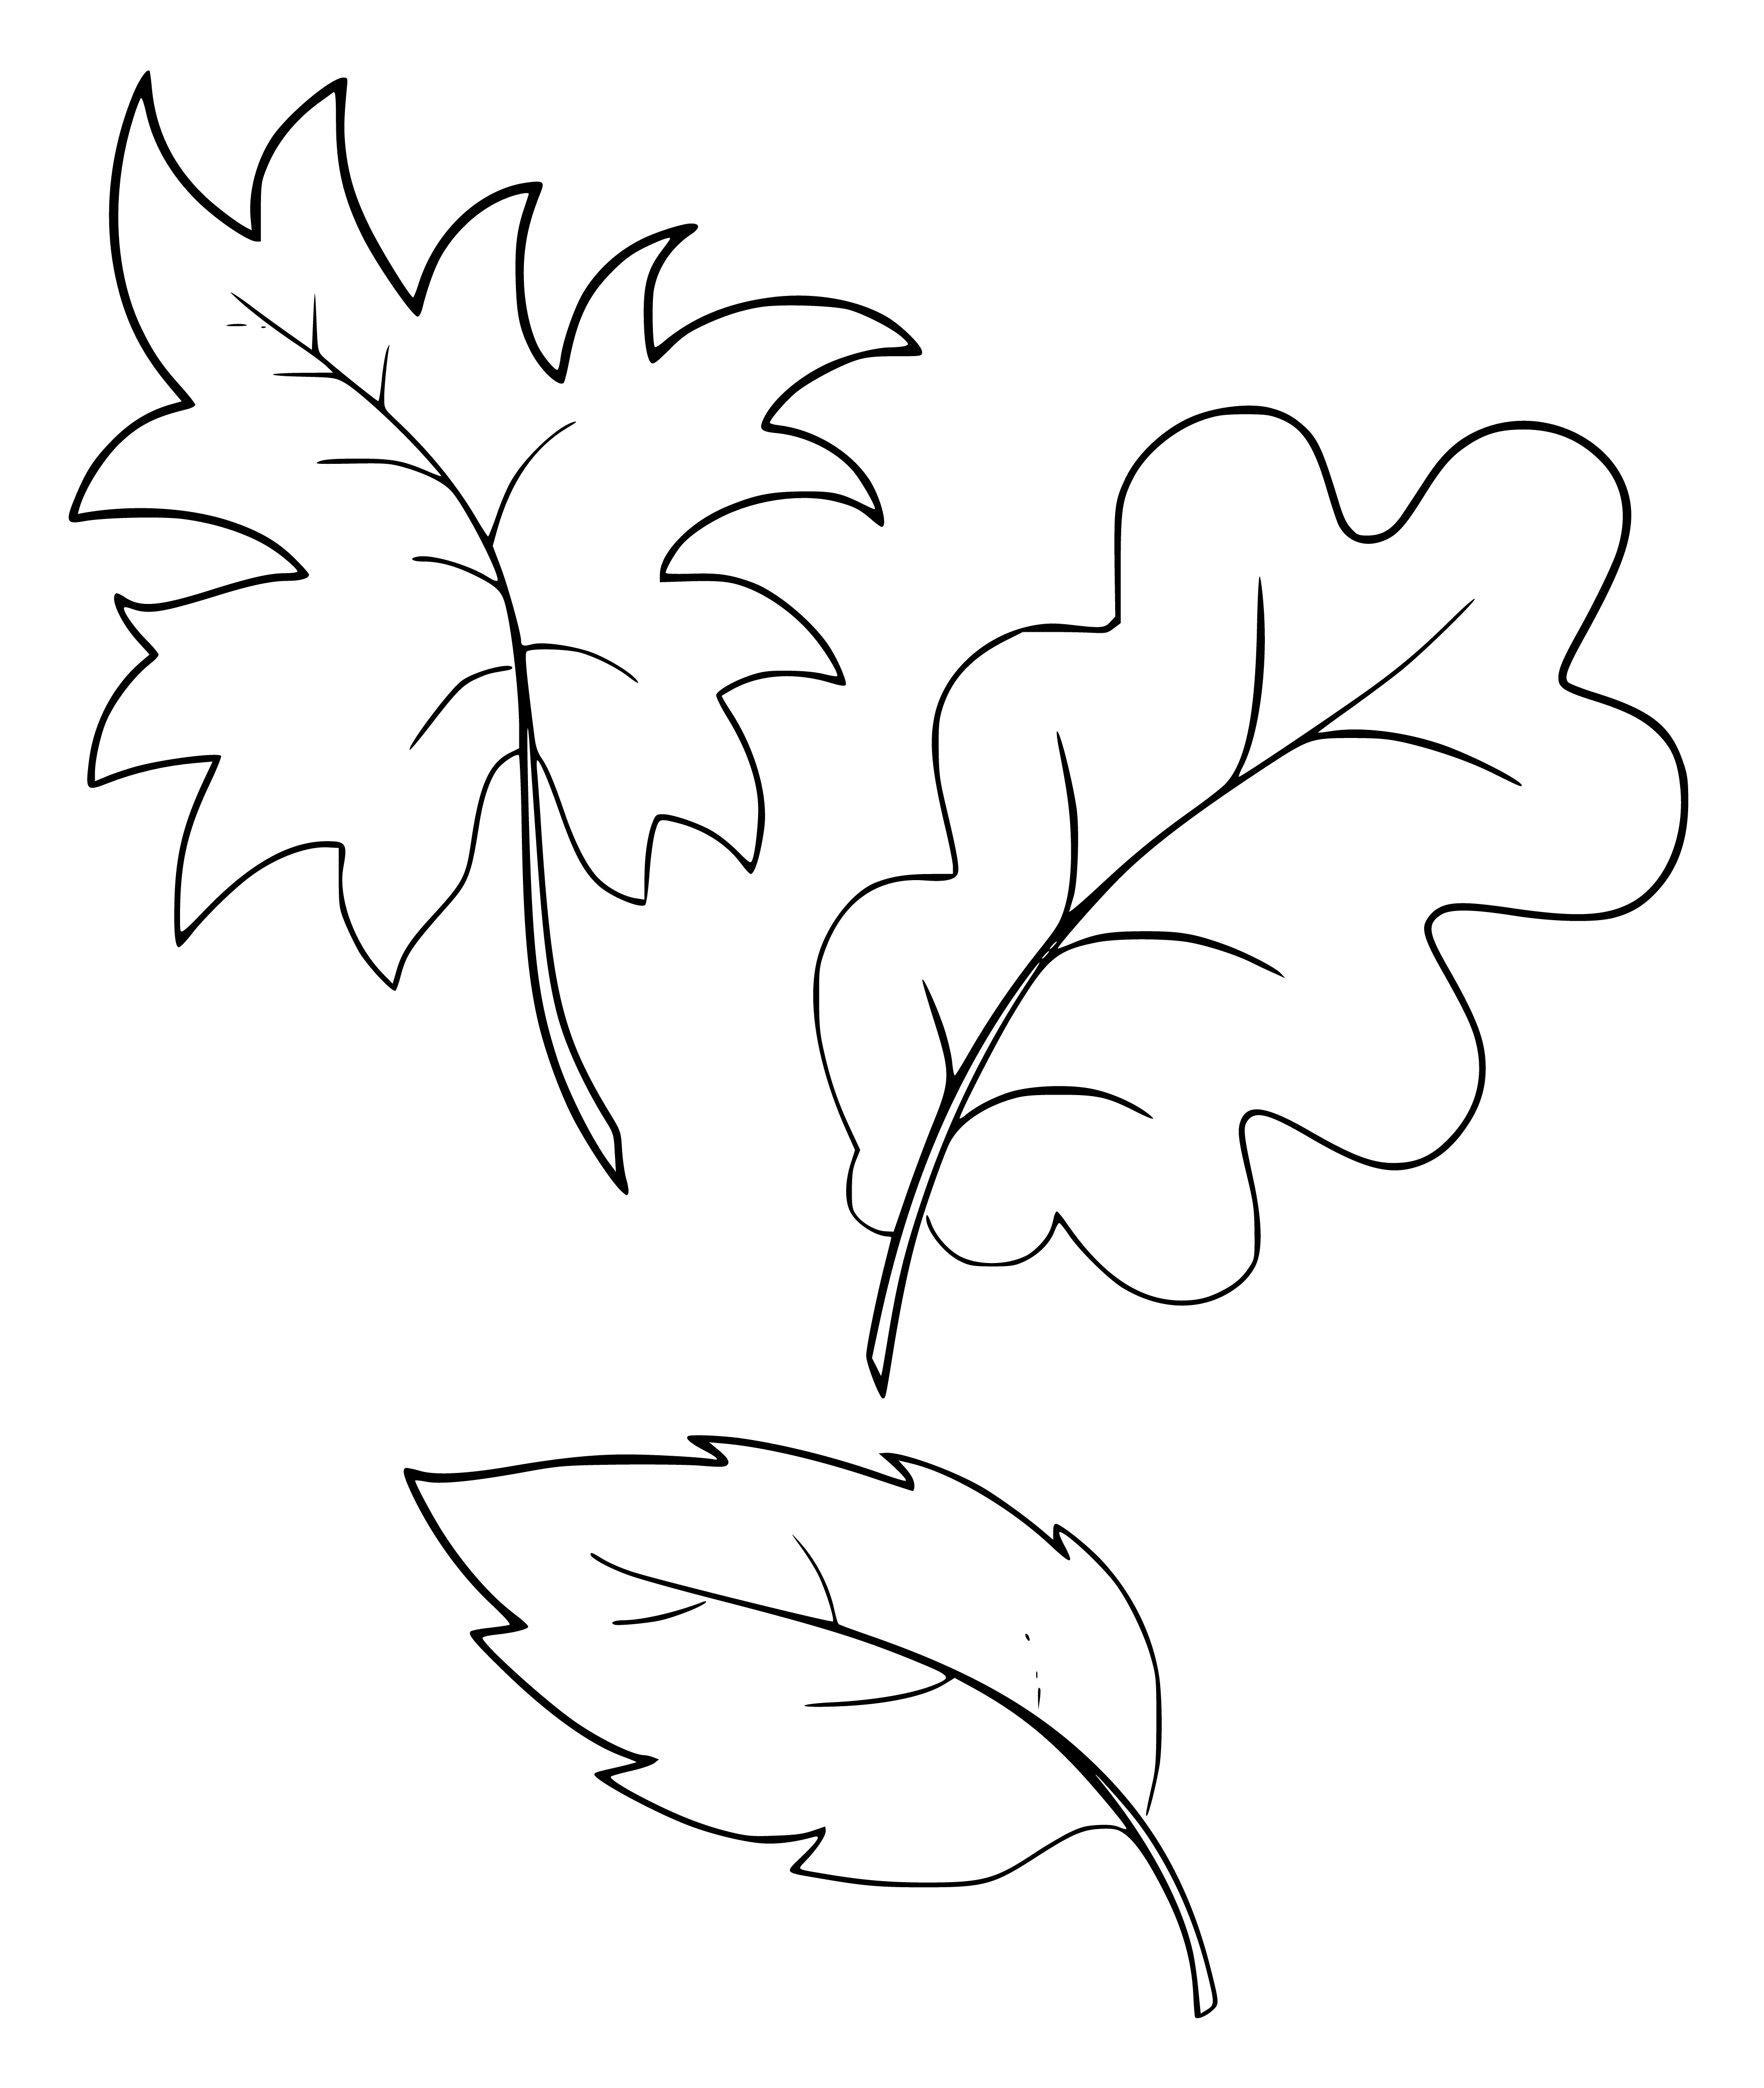 Printable Different Types of Leaves Coloring Page for kids.